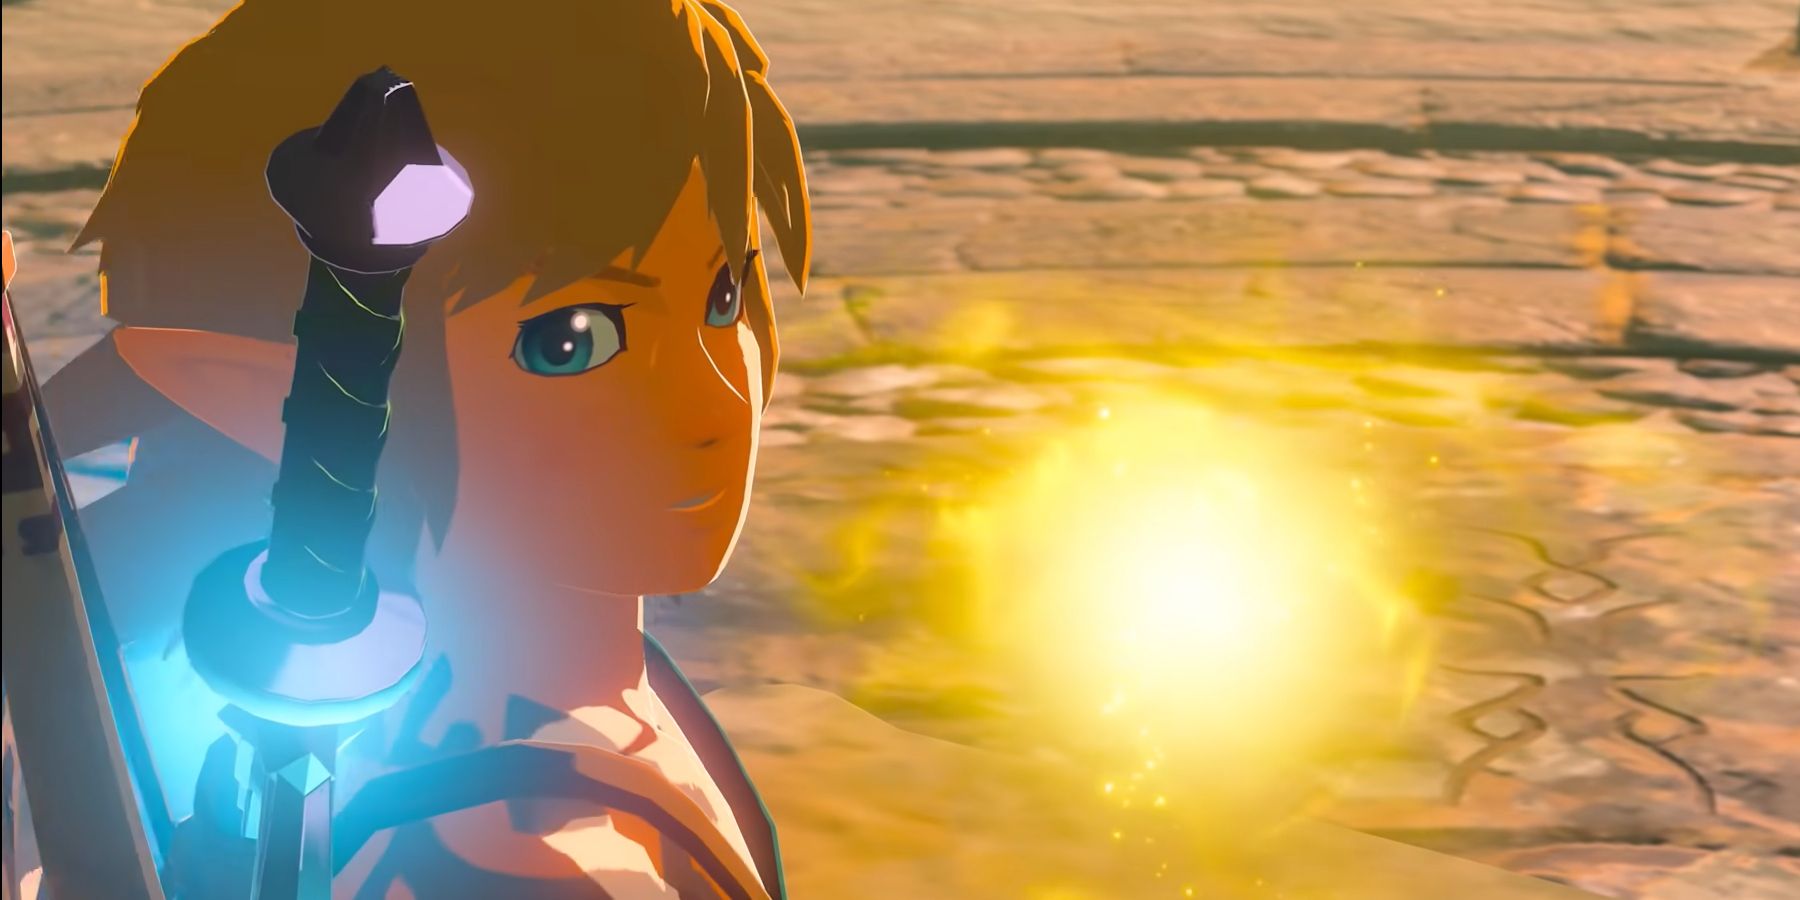 The Legend of Zelda: Breath of the Wild 2 Teaser featuring Link and the Master Sword with a golden ball of light